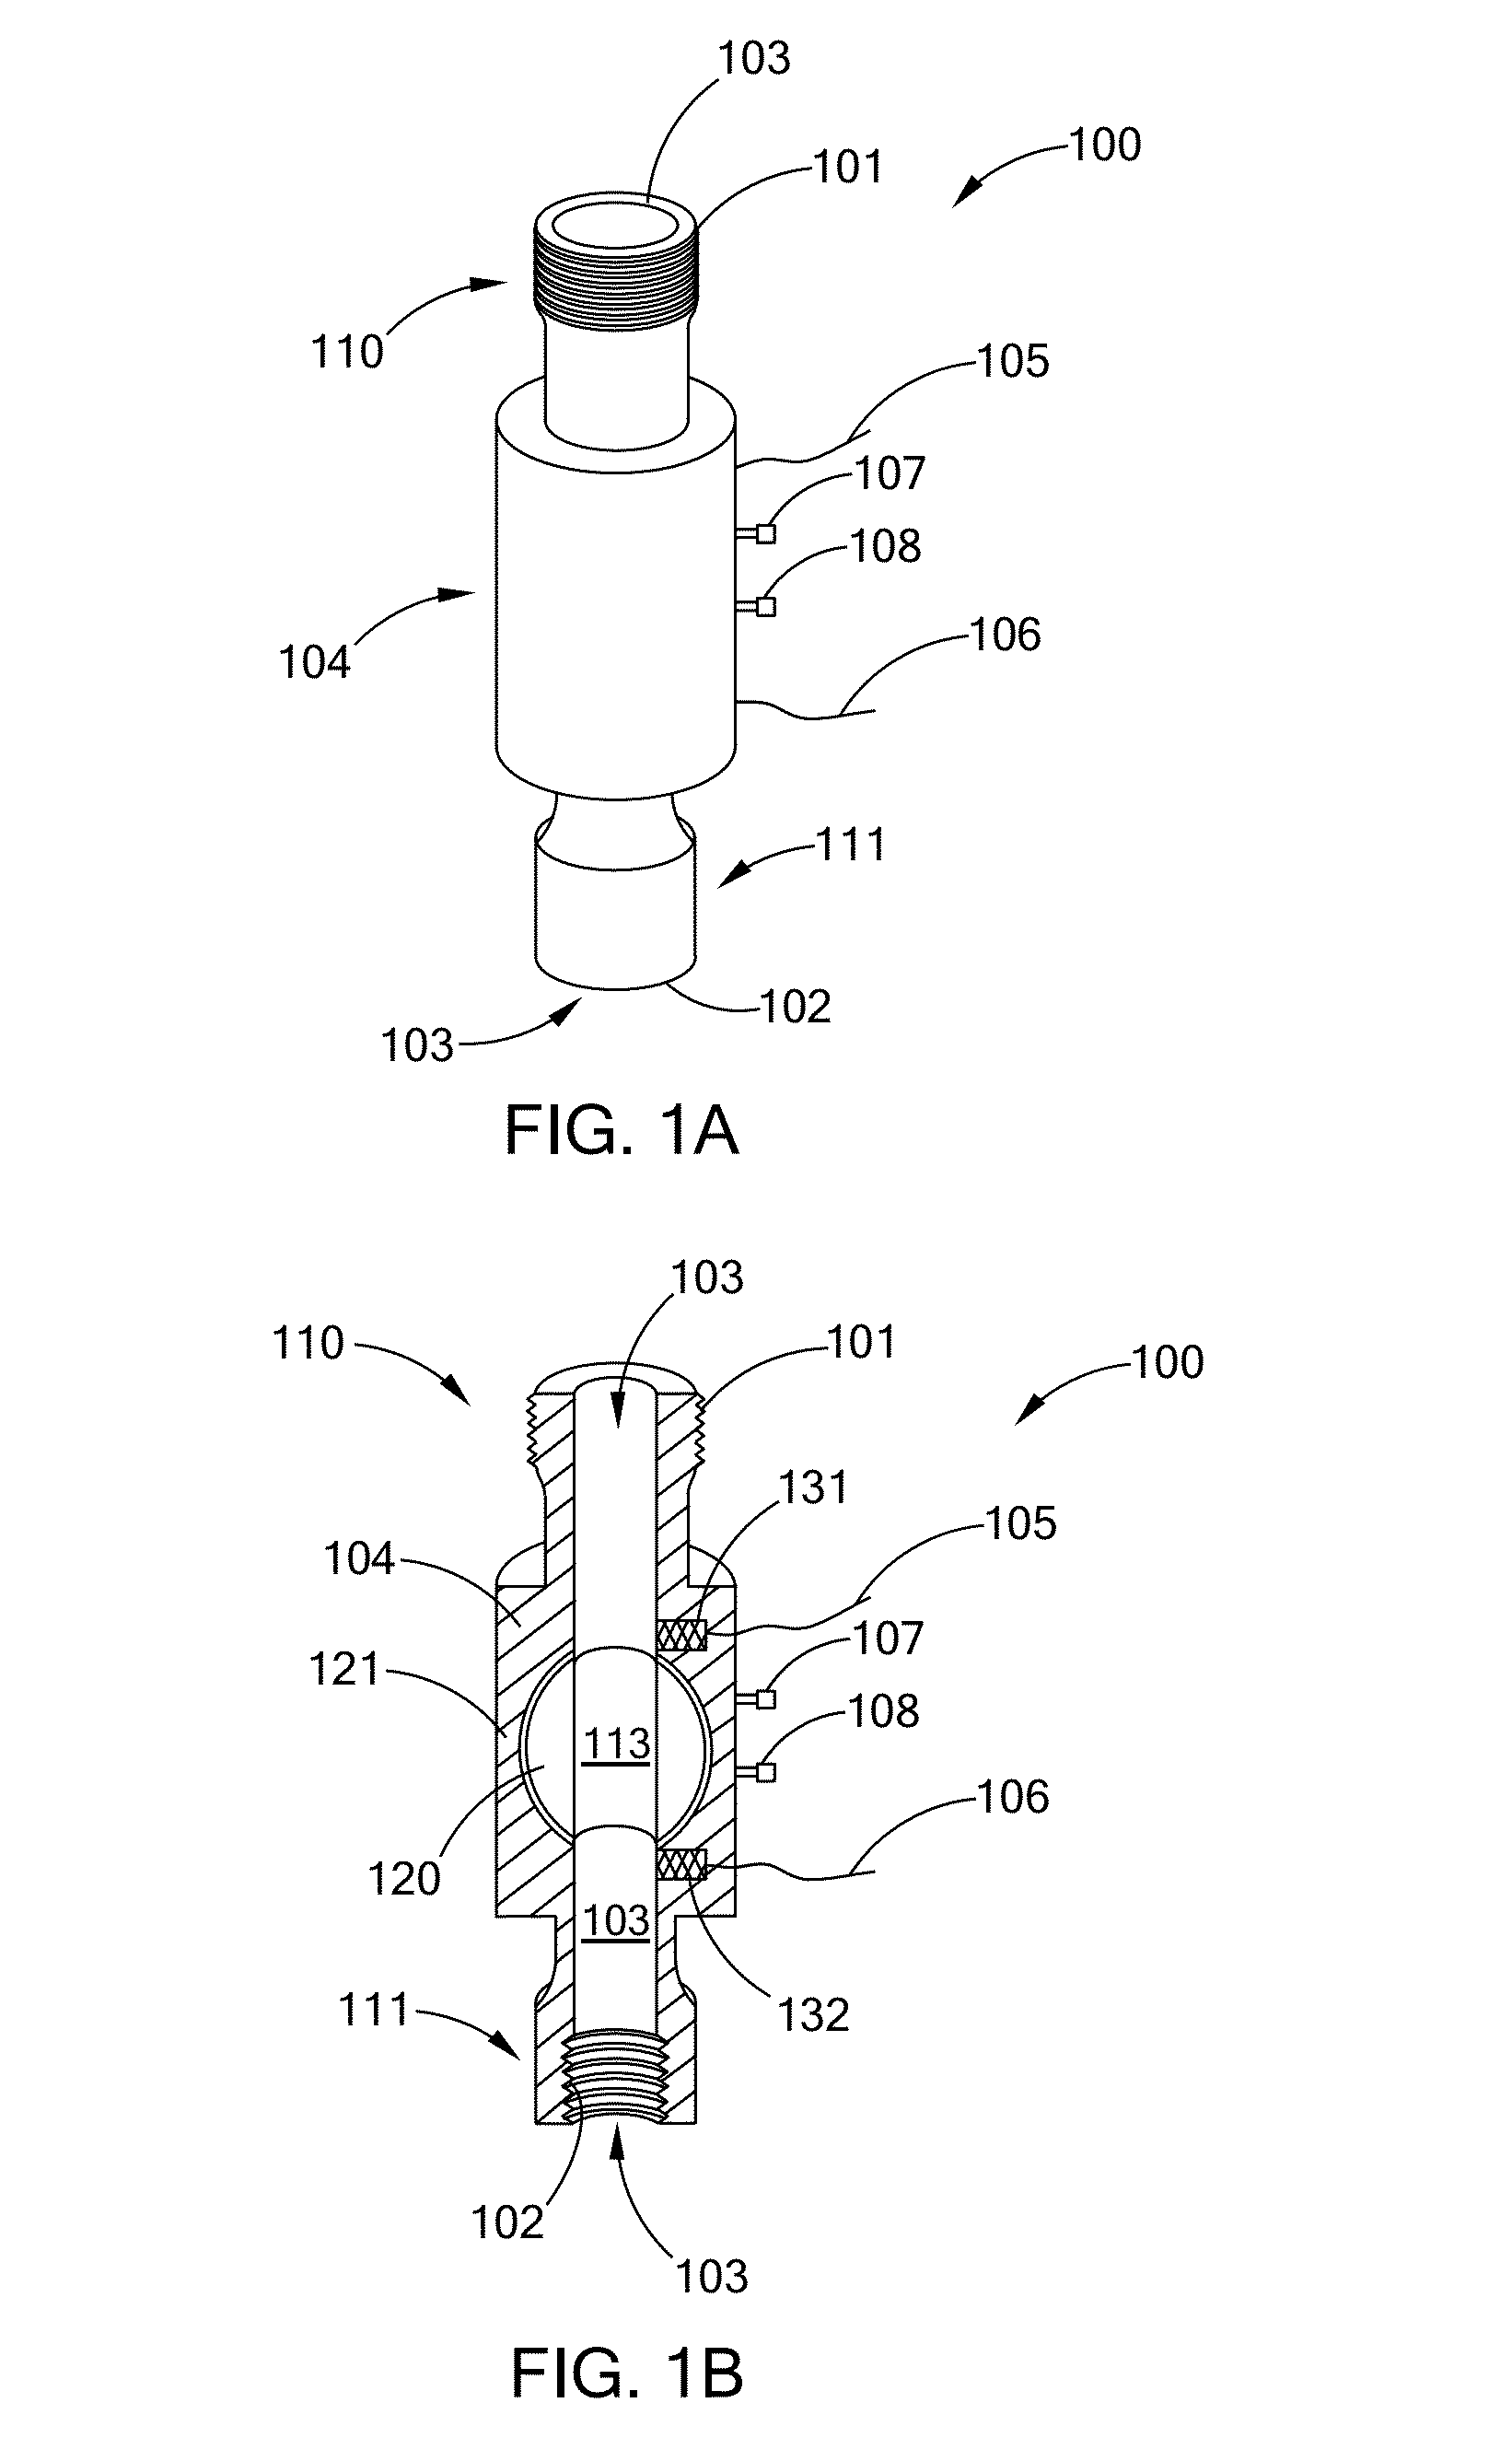 Light weight high power laser presure control systems and methods of use